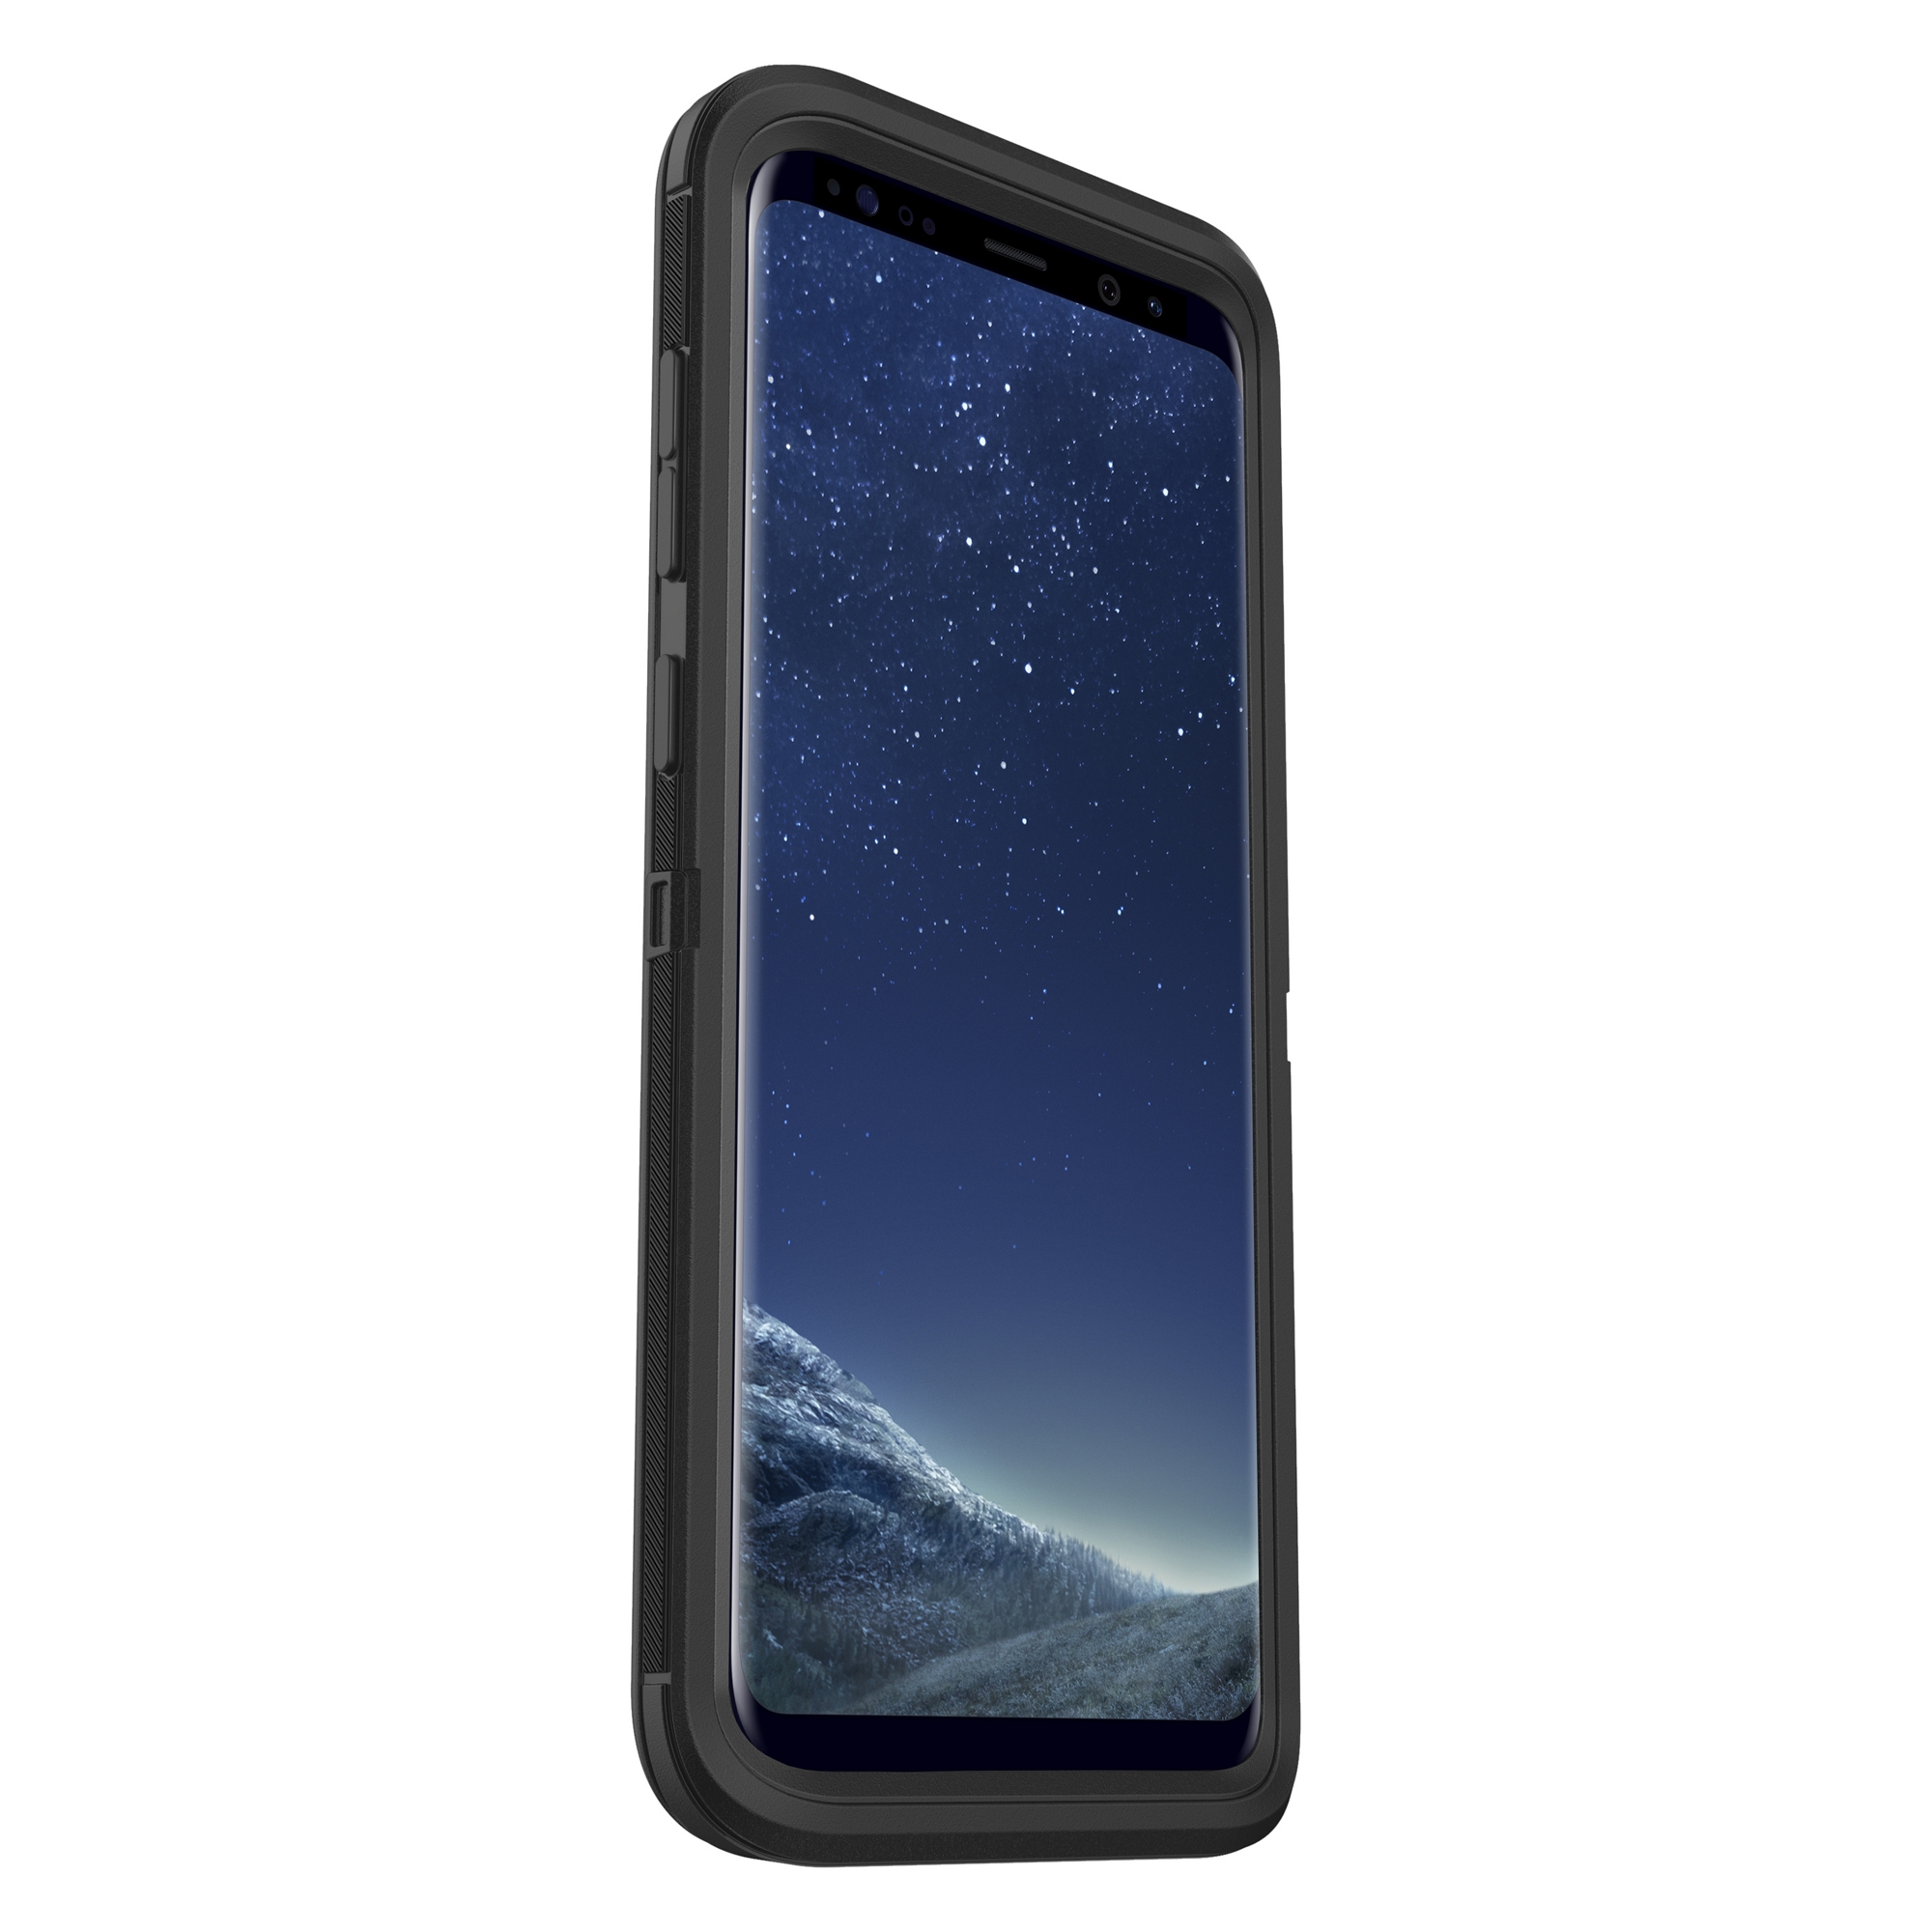 Thumbnail image of OtterBox Defender for Galaxy S8+, Black